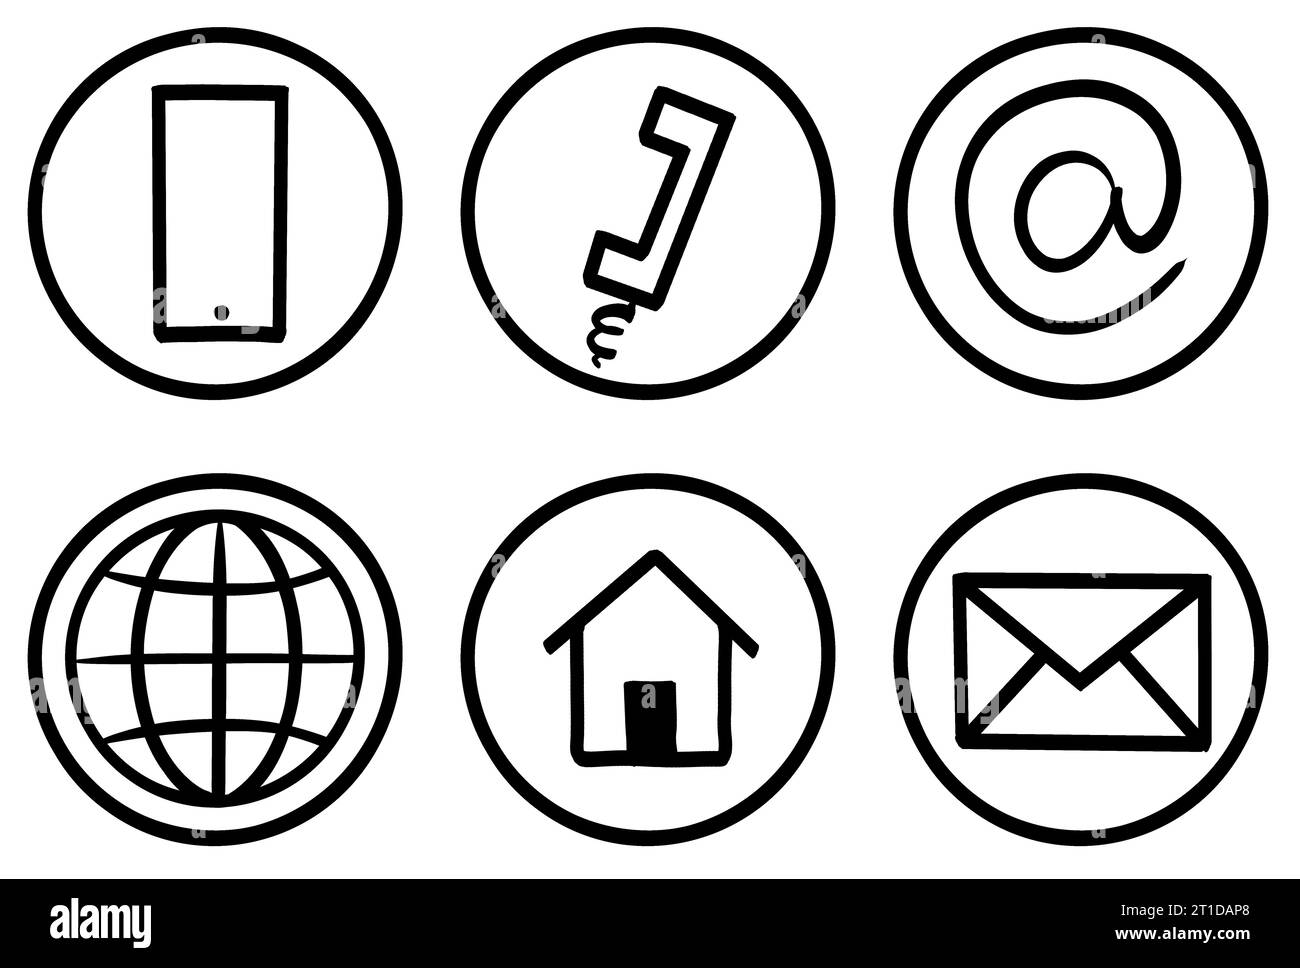 Icon set Business Contact us doodle hand drawn Stock Photo